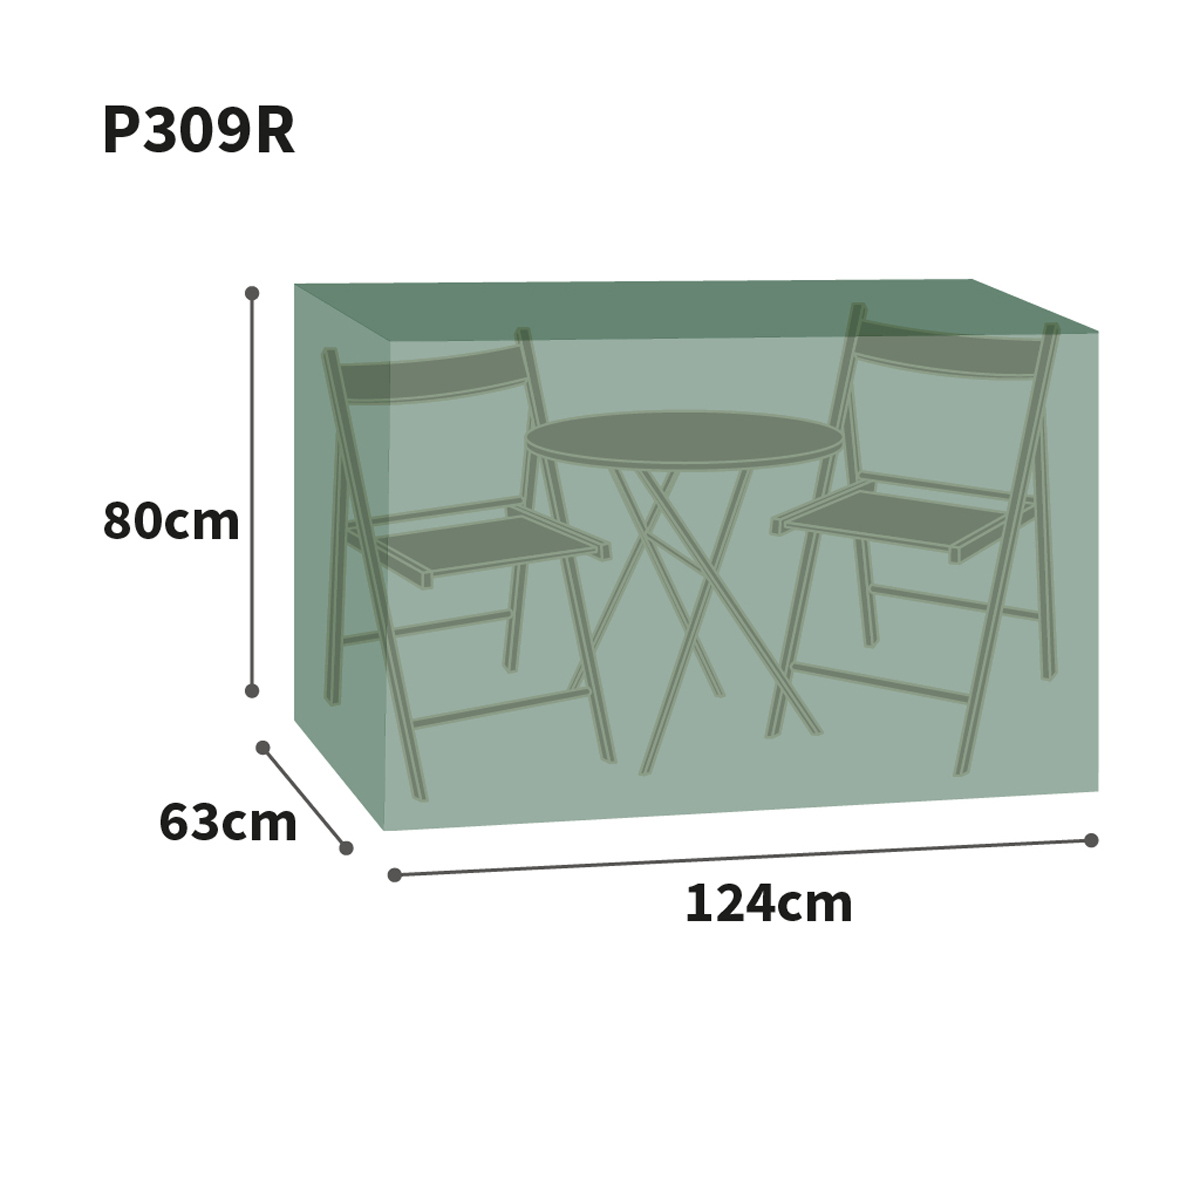 Bosmere Protector Bistro Set Cover Graphic Size Guide